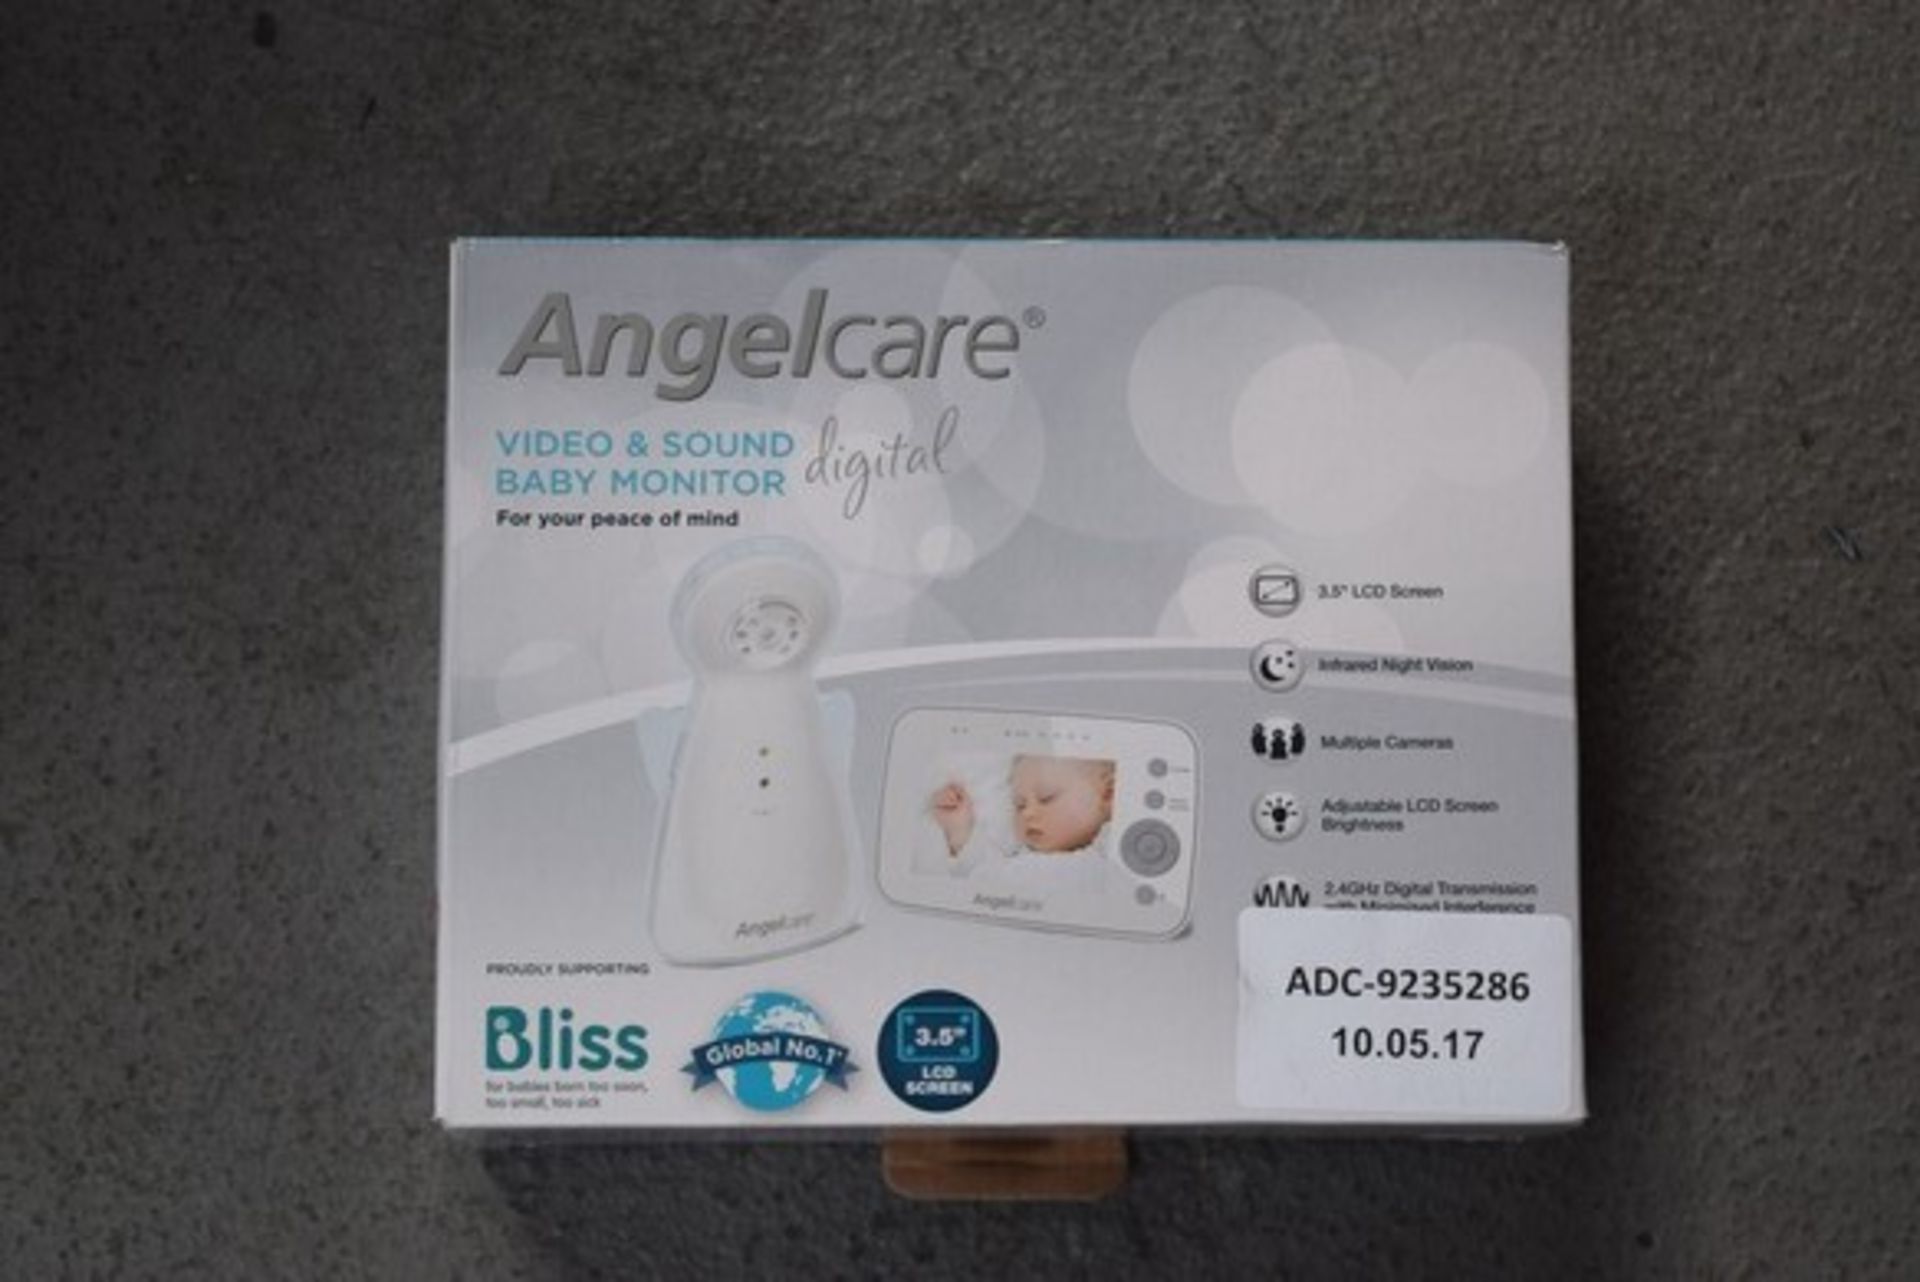 1 x ANGEL CARE VIDEO SOUND BABY MONITOR RRP £90 10.05.17 *PLEASE NOTE THAT THE BID PRICE IS